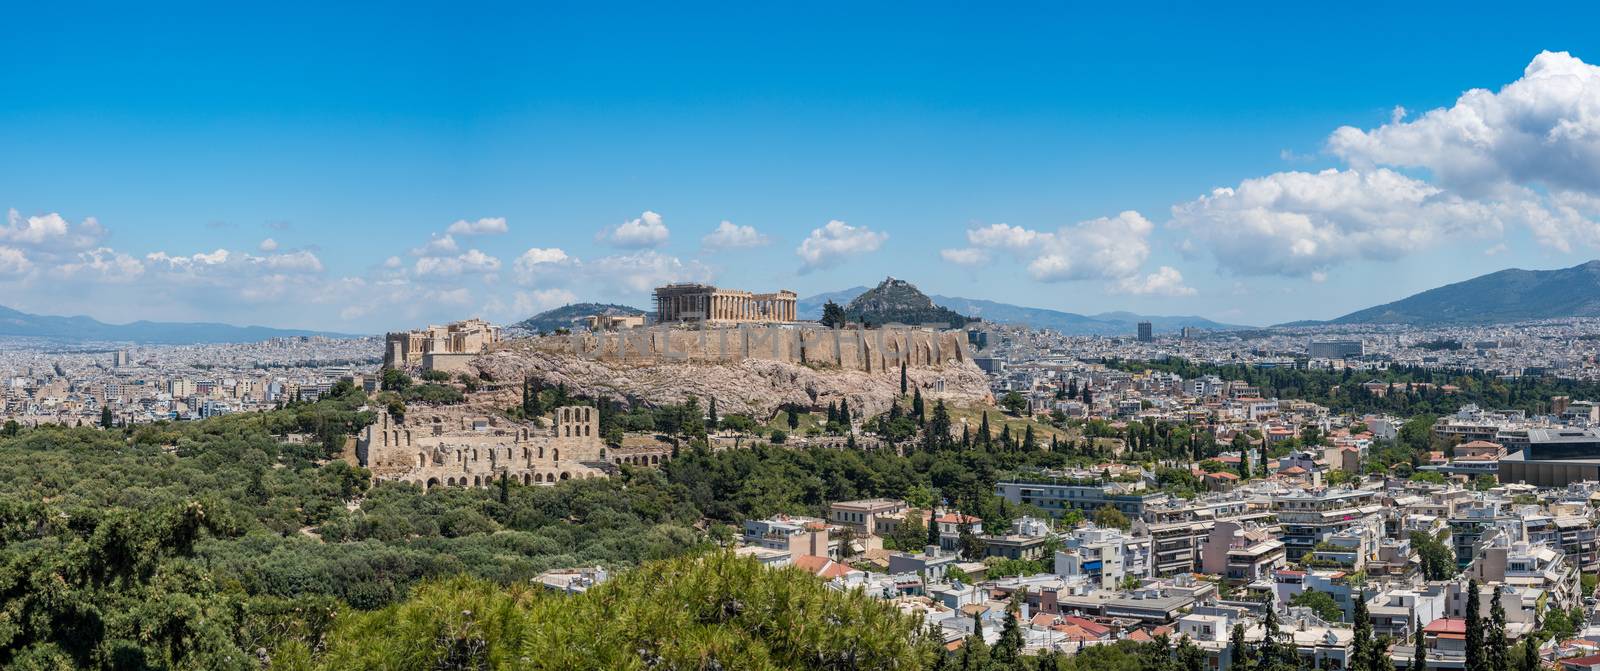 Panorama of city of Athens from Lycabettus hill by steheap